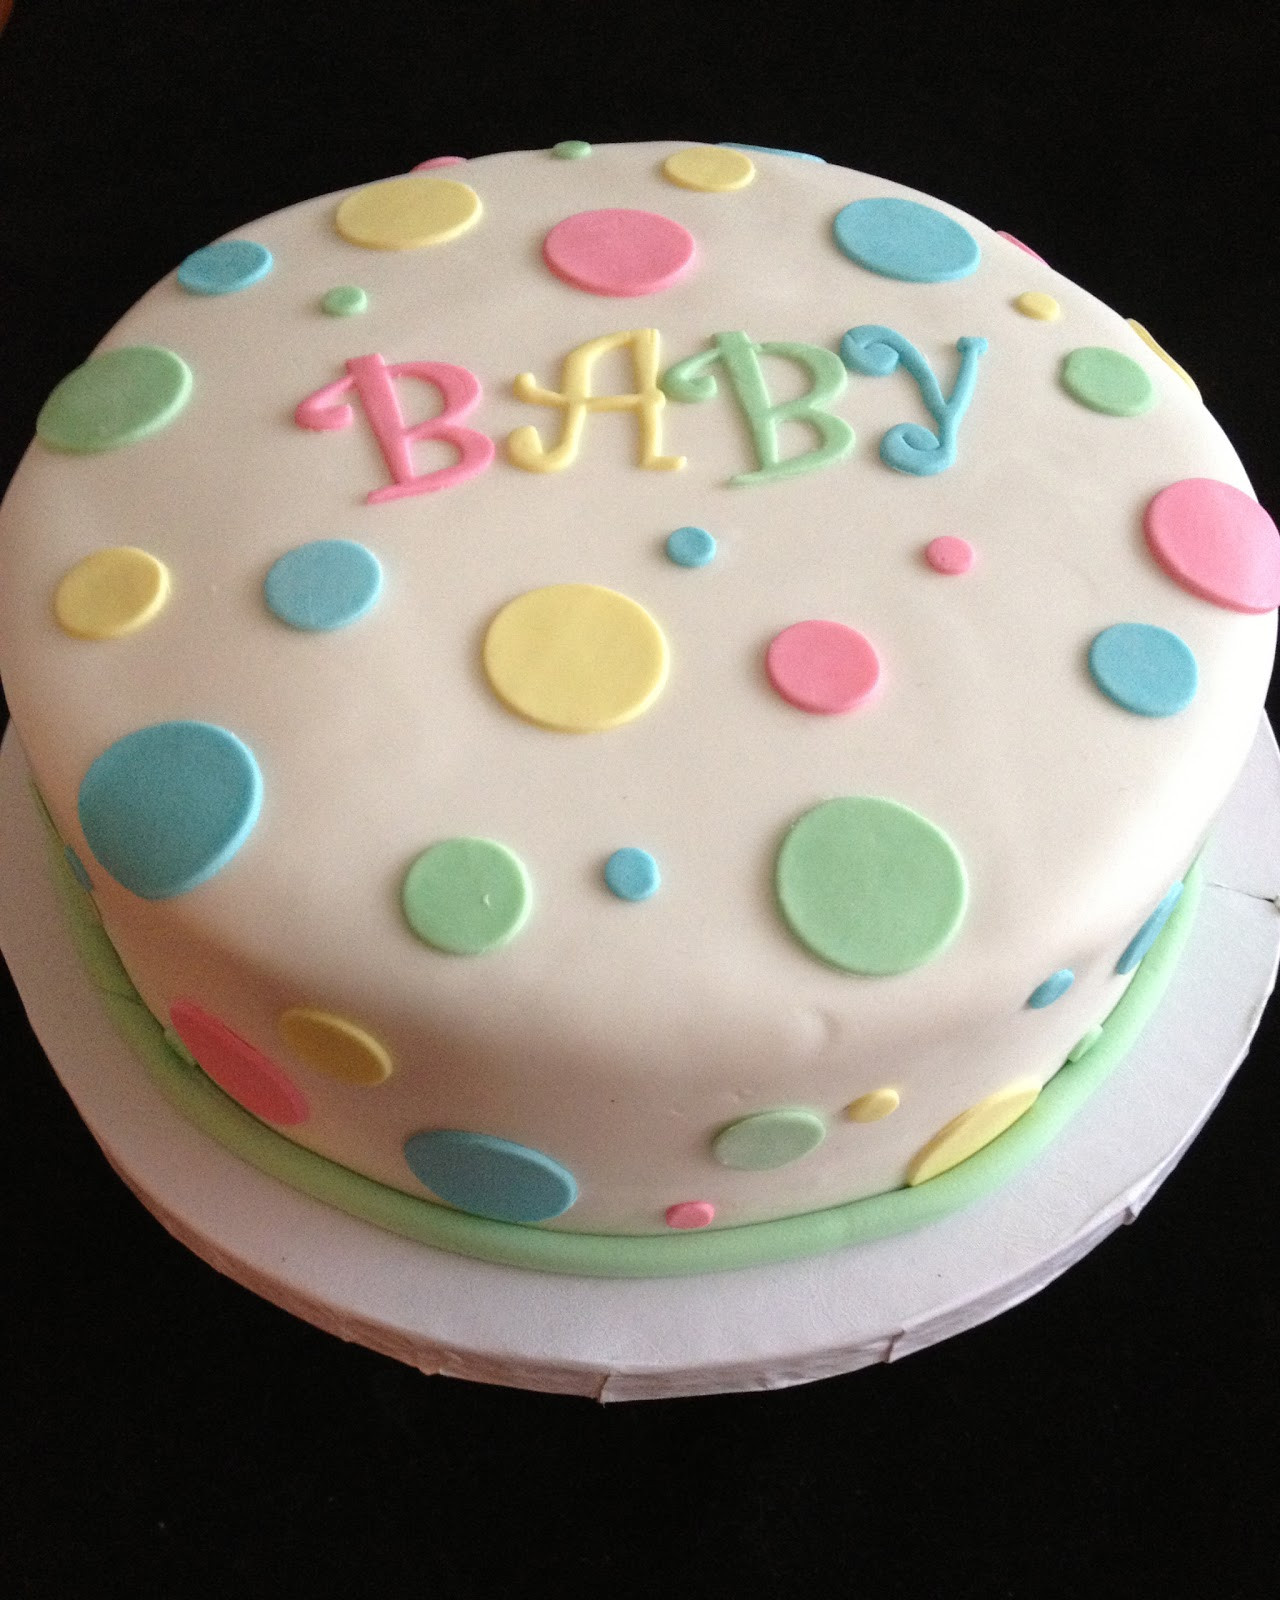 Easy Cake Decorating Ideas For Baby Shower
 Baby Shower Cake